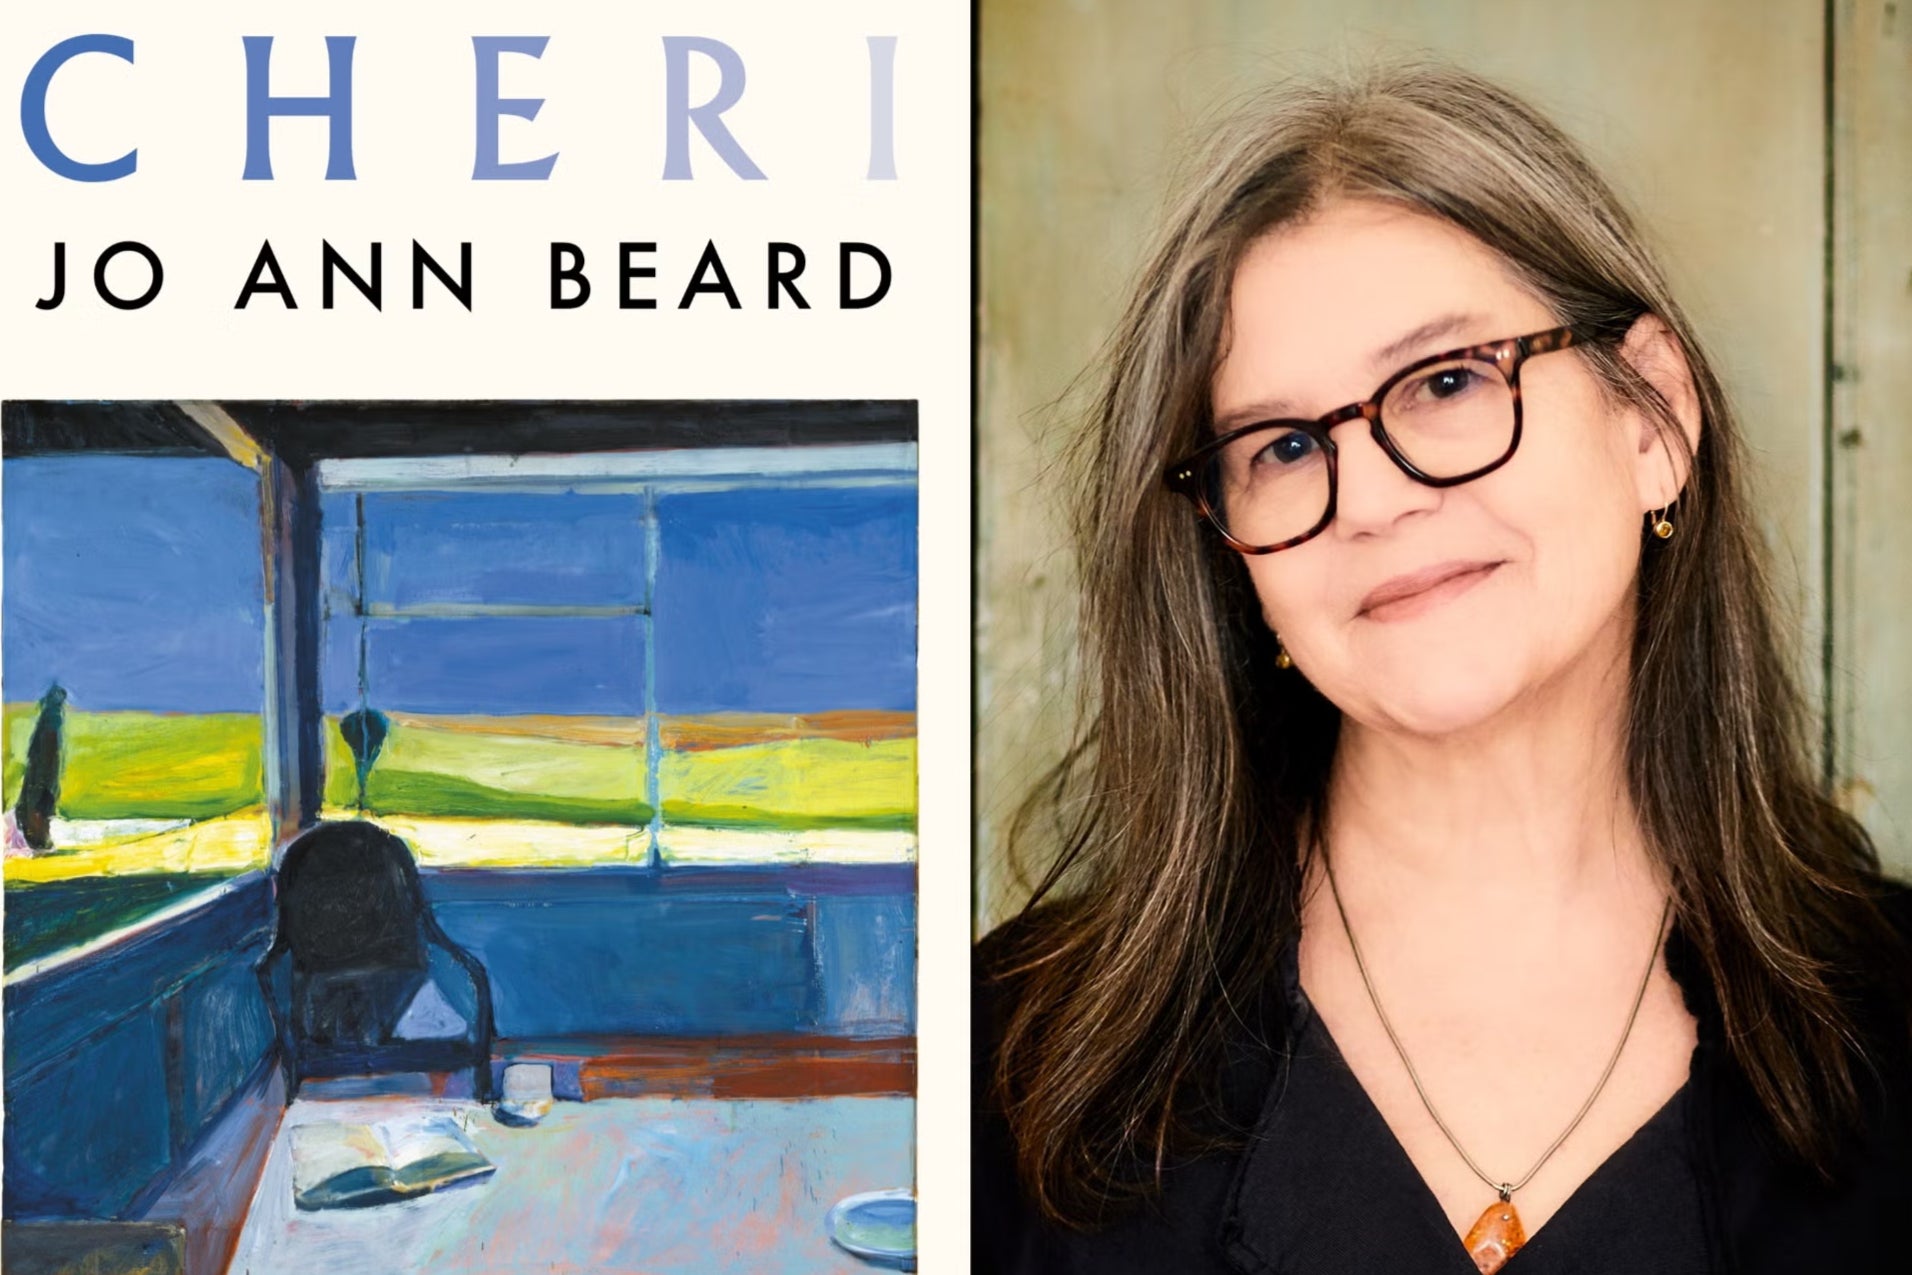 Jo Ann Beard’s ‘Cheri’ recounts the last days, minutes and seconds of a woman who elects to undergo assisted suicide